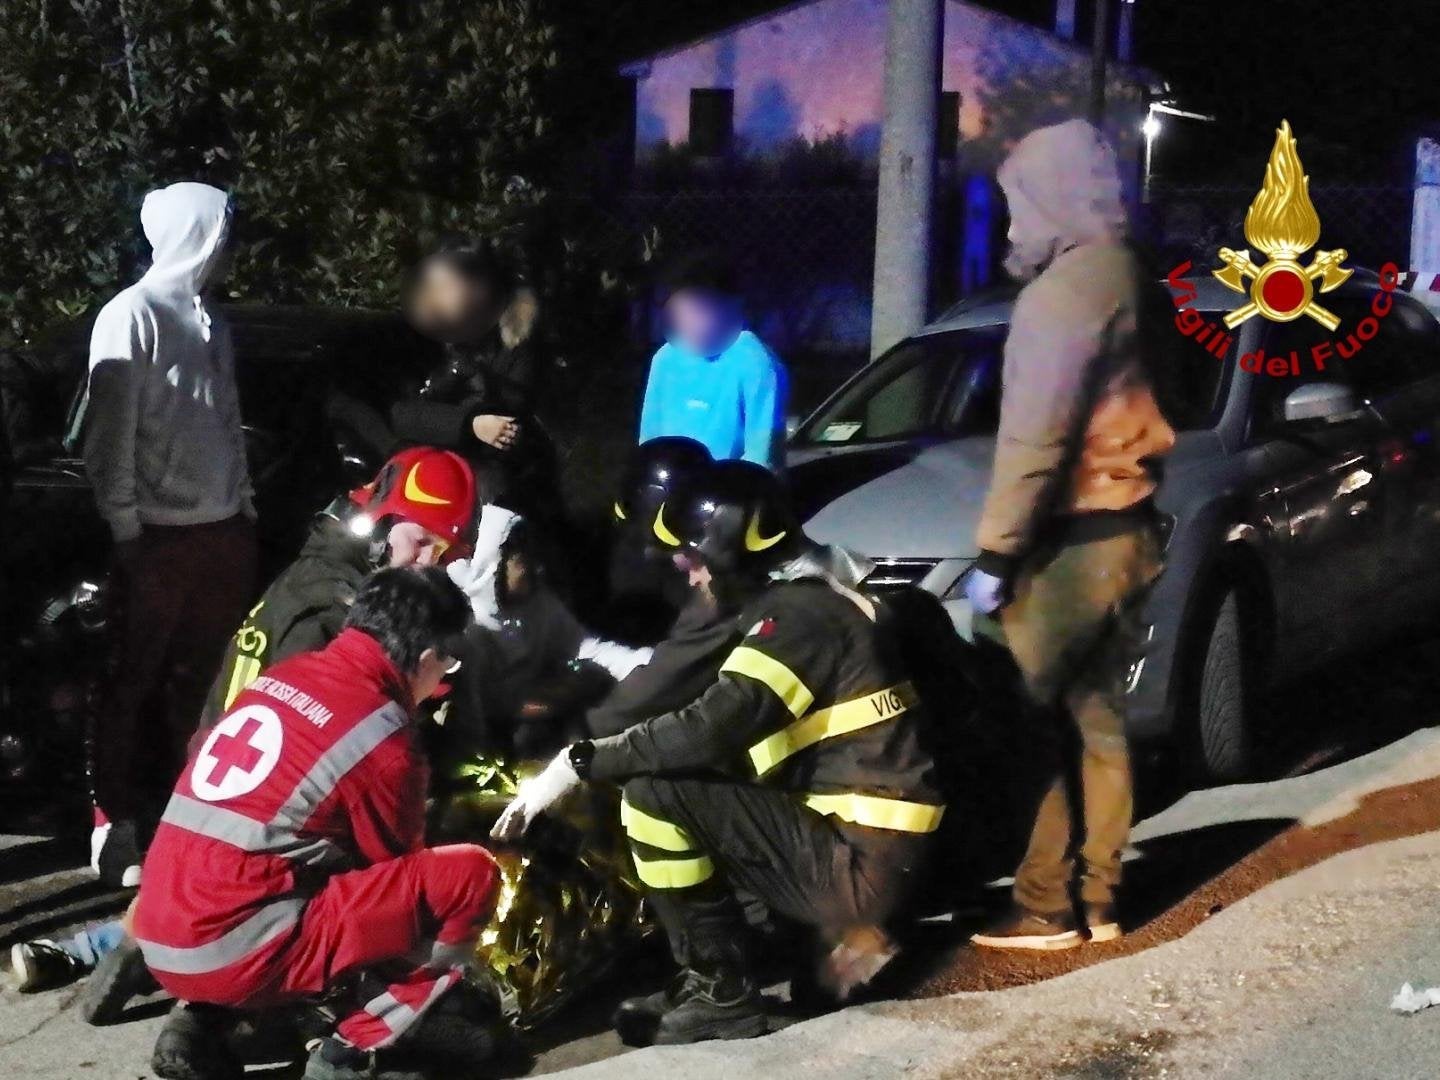 Italian fire and rescue service treating victims after a stampede at a nightclub in Cornaldo